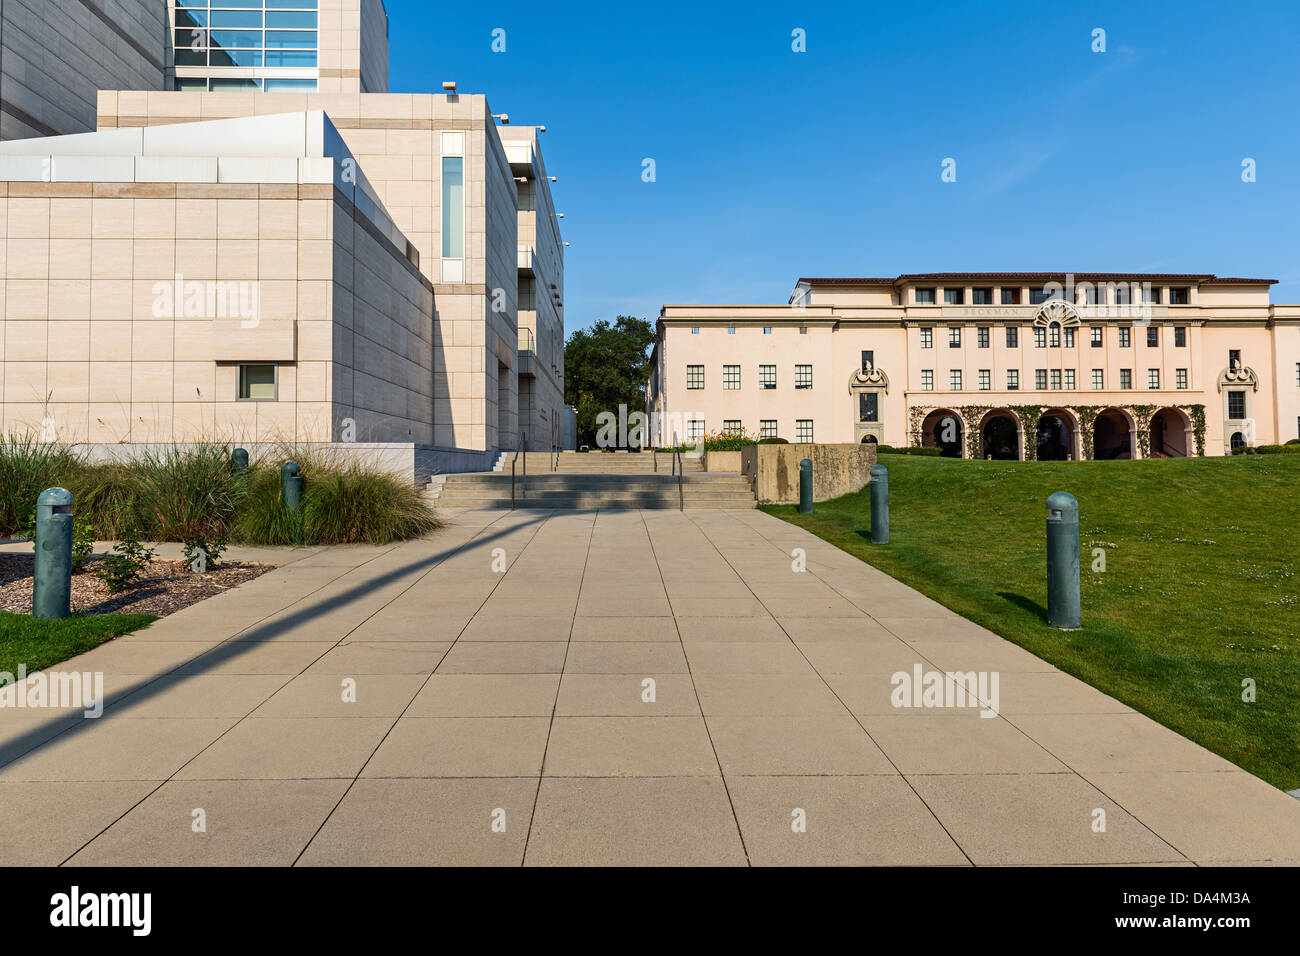 The Beckman Institute at Caltech, the California Institute of Technology. Stock Photo